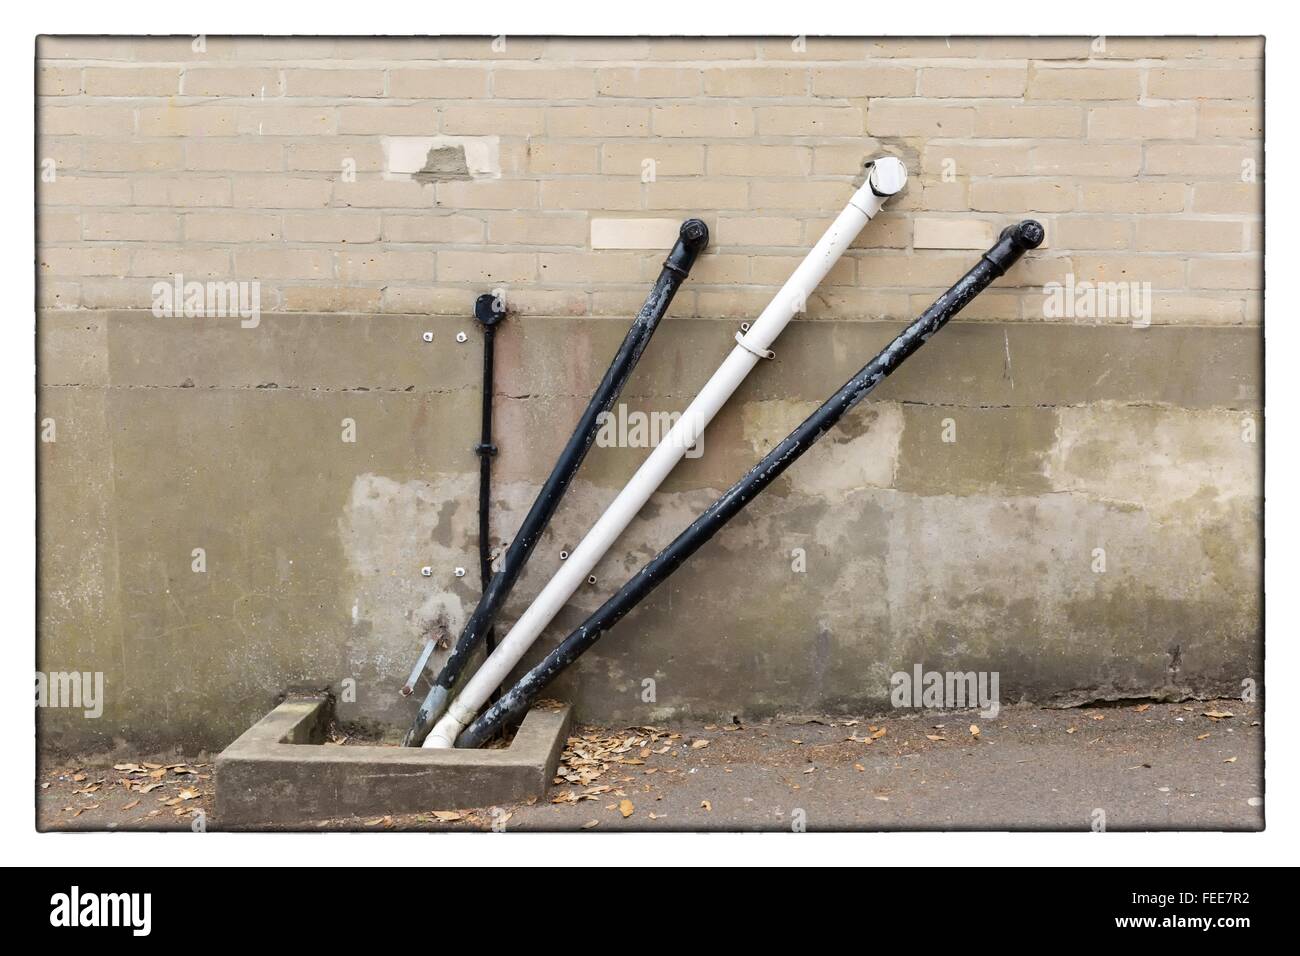 A photo of black and white angular water pipes on a beige brickwork wall Stock Photo